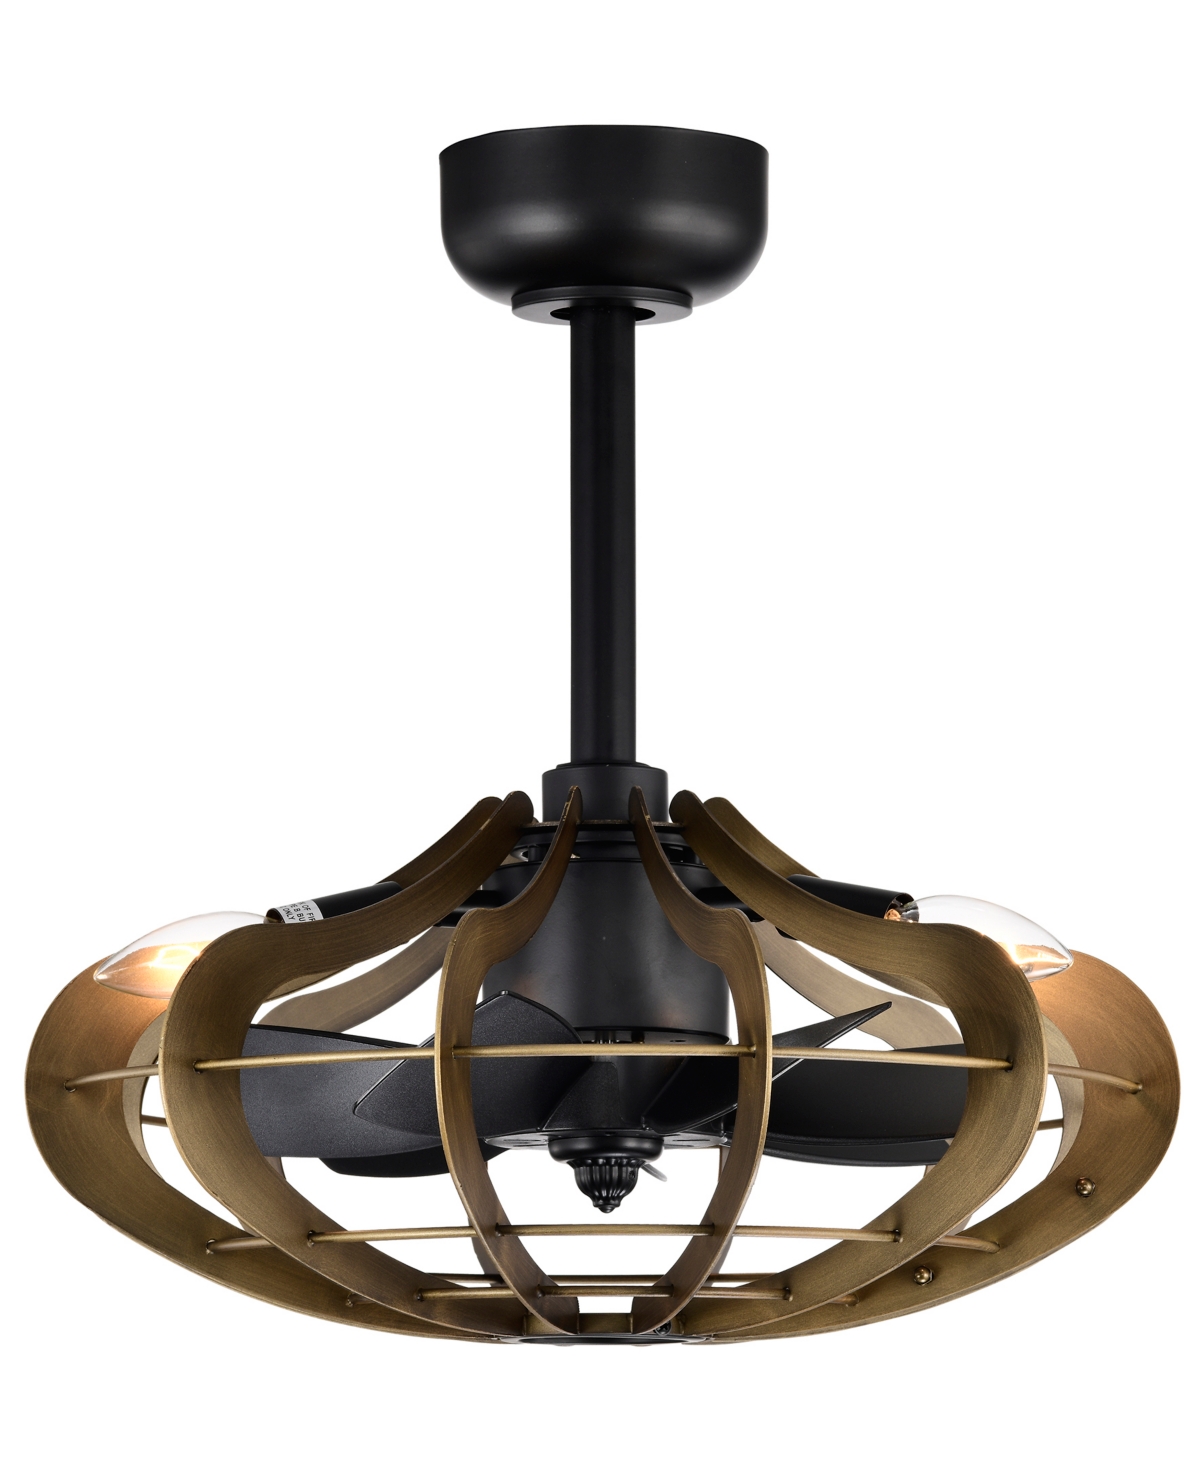 Home Accessories Mia 18" 3-light Indoor Finish Ceiling Fan With Light Kit In Matte Black And Faux Wood Grain